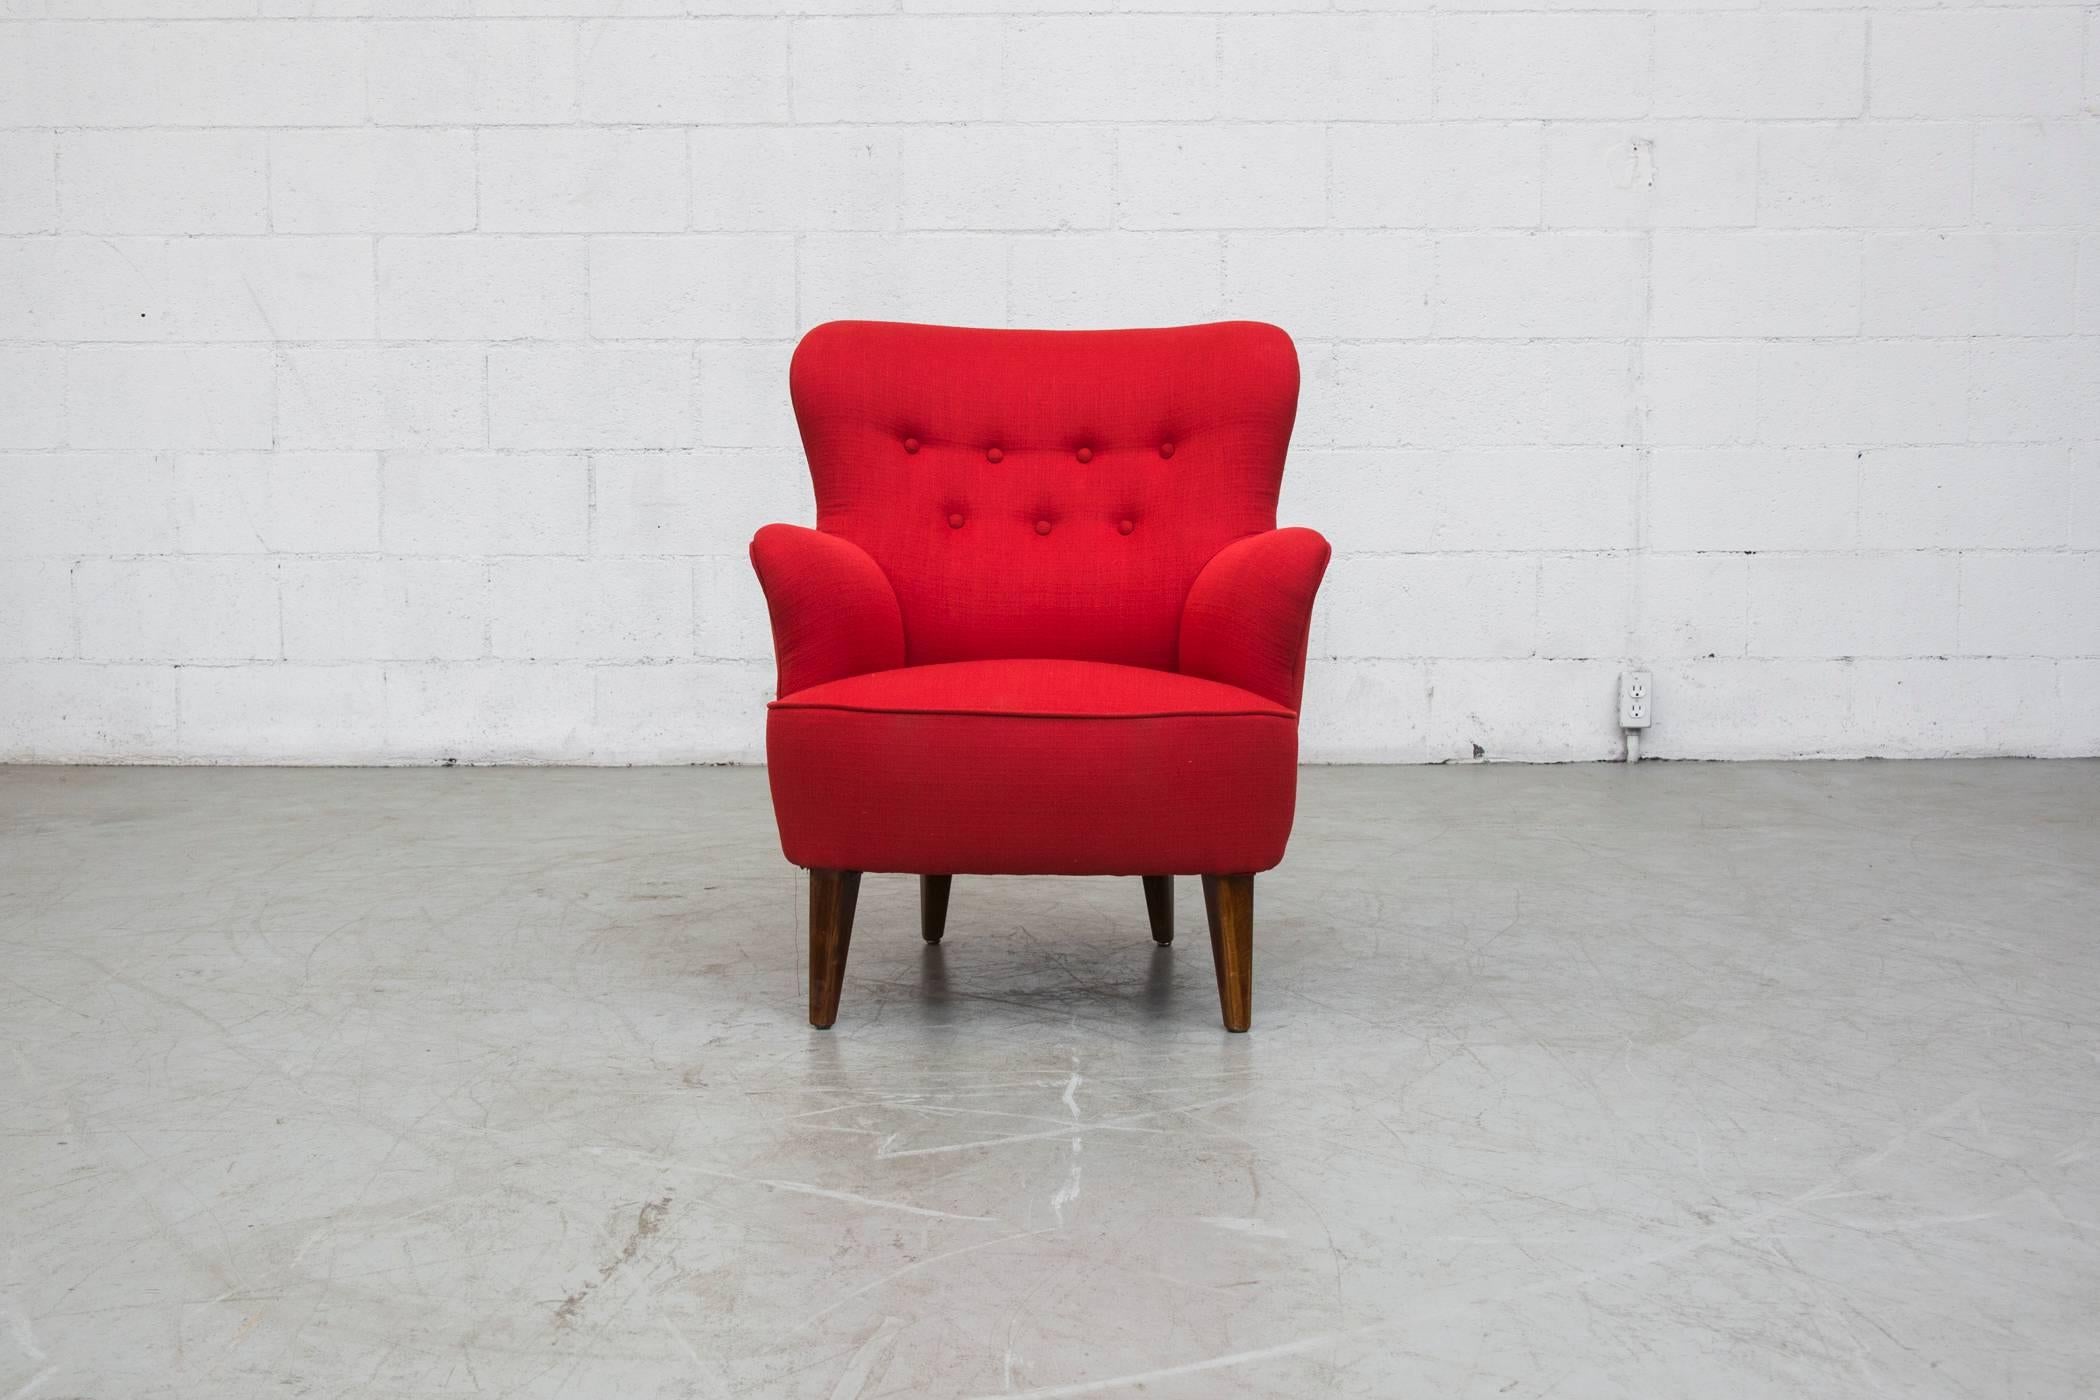 Vintage Theo Ruth lounge chair circa 1956, newly upholstered in lipstick red fabric with original legs. Two available.